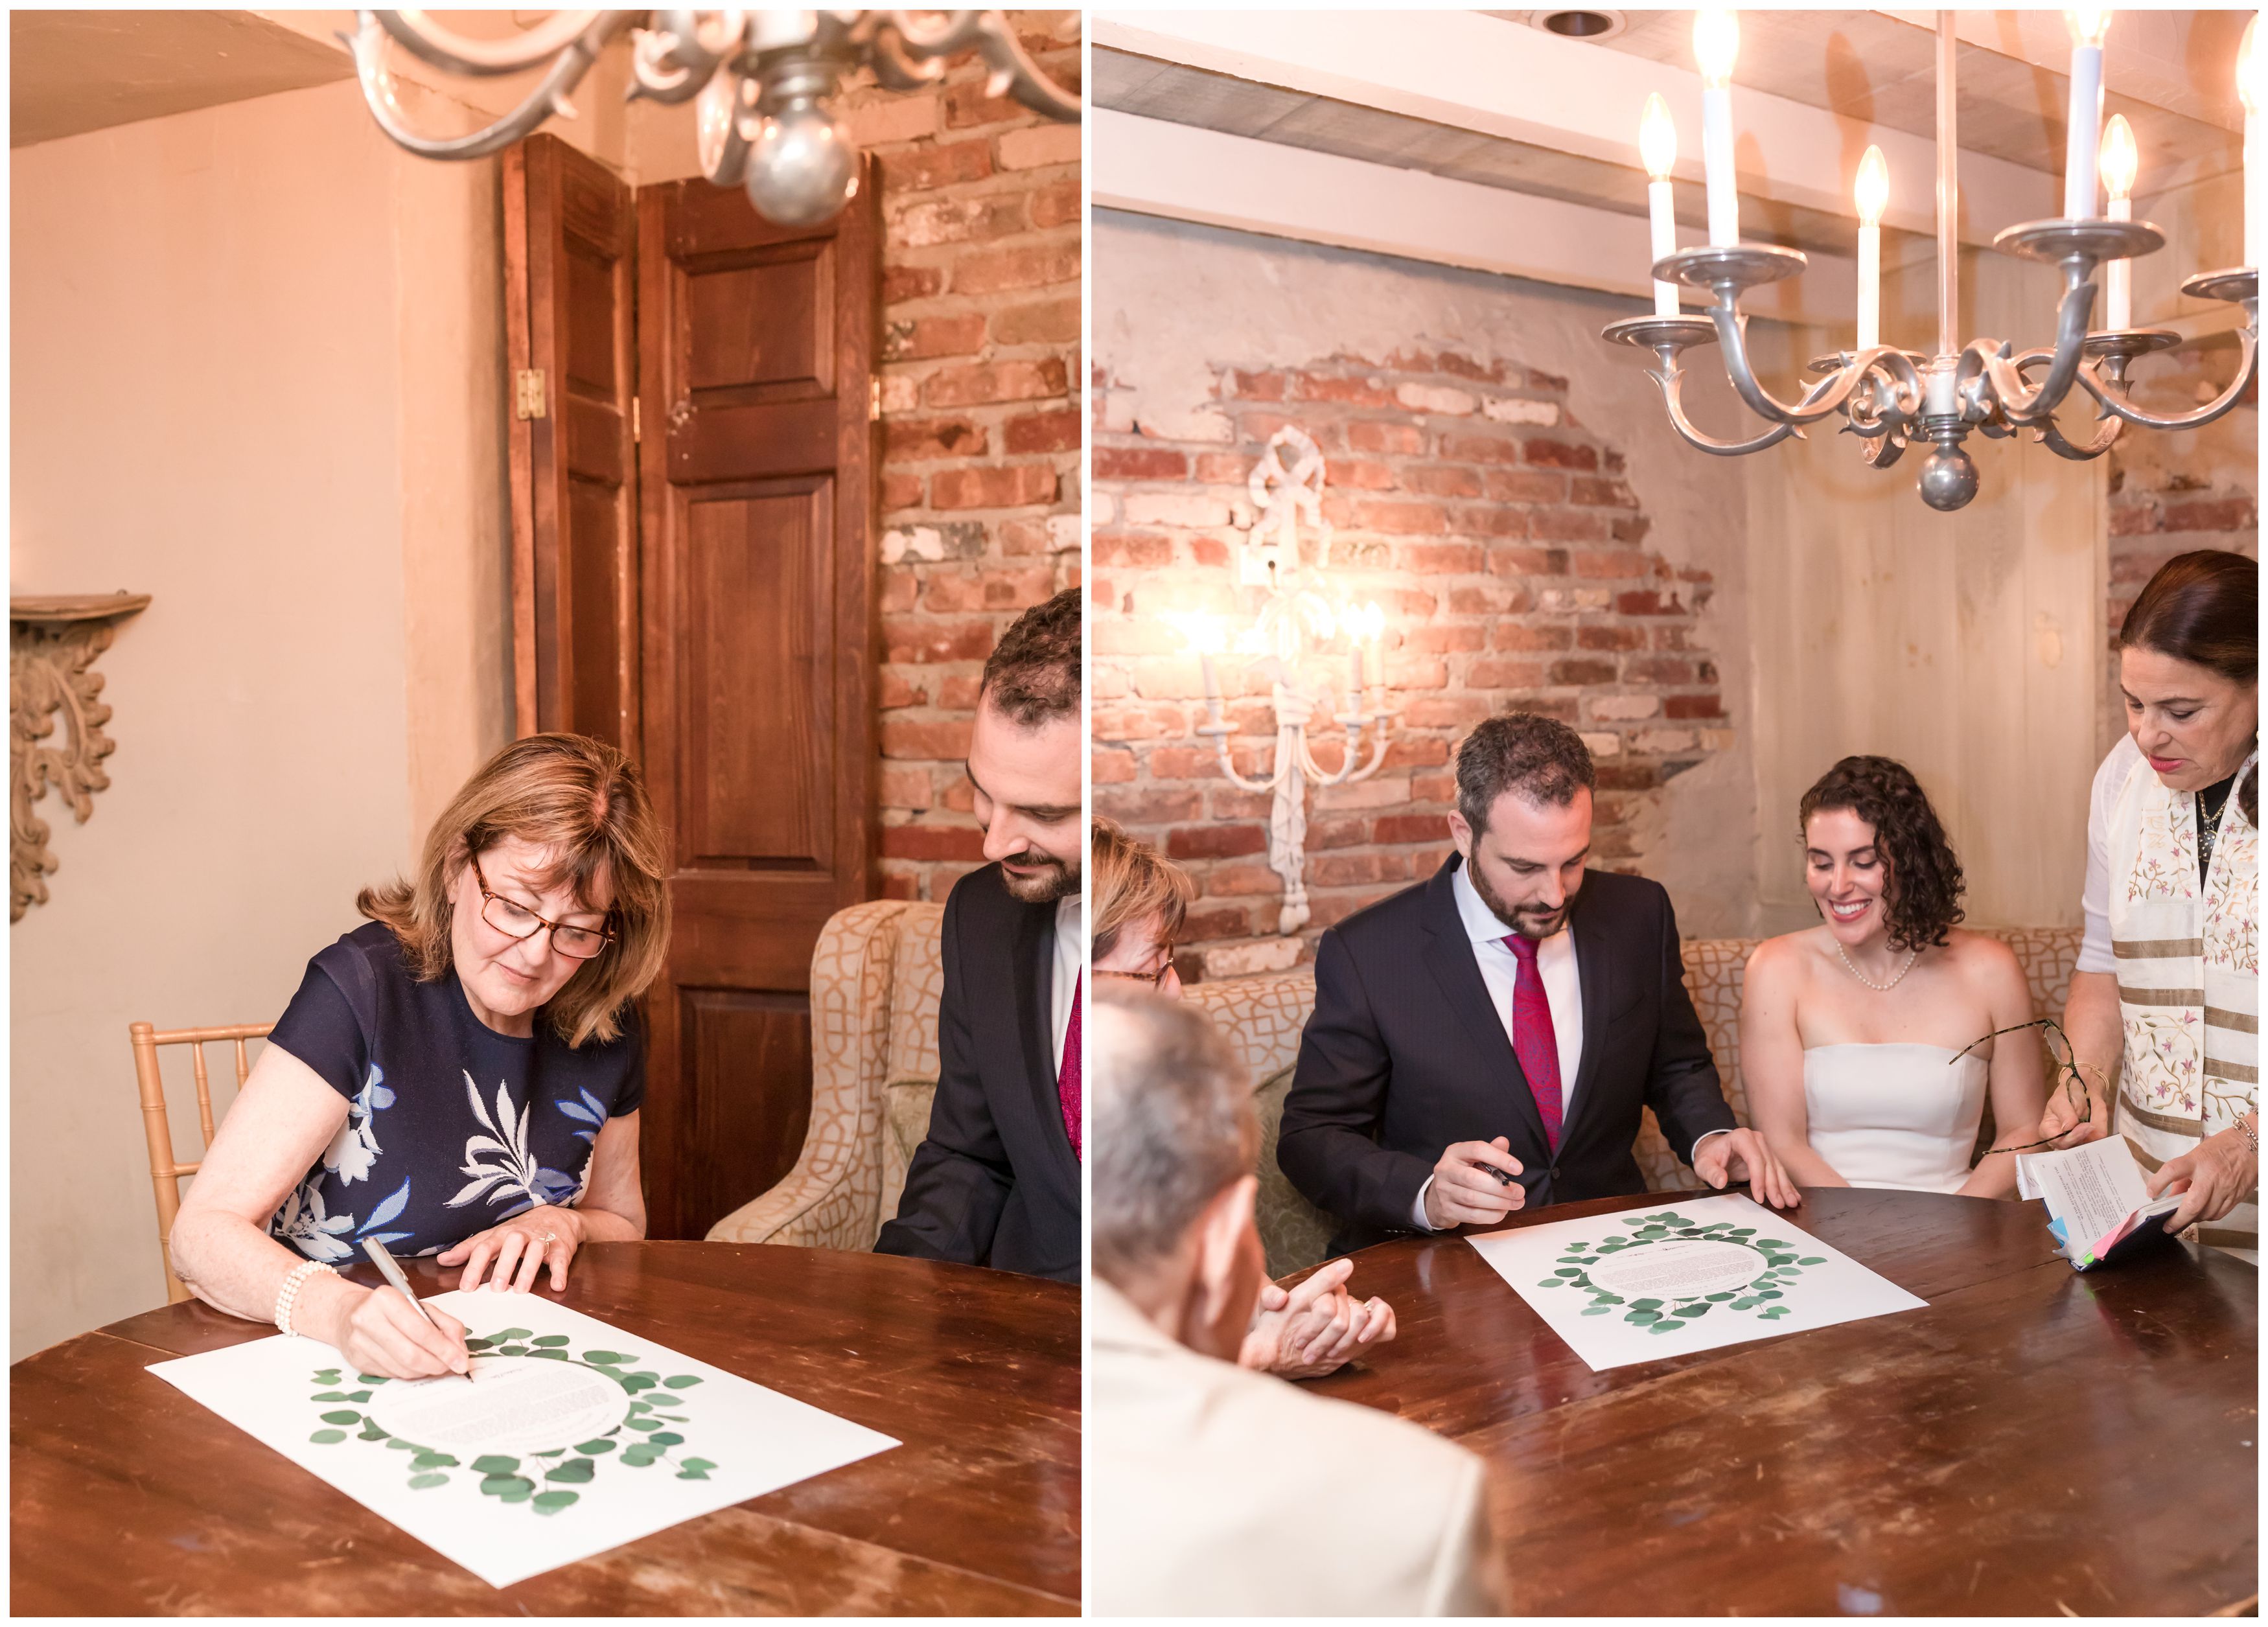 Bride and groom with family and the Ketubah signing